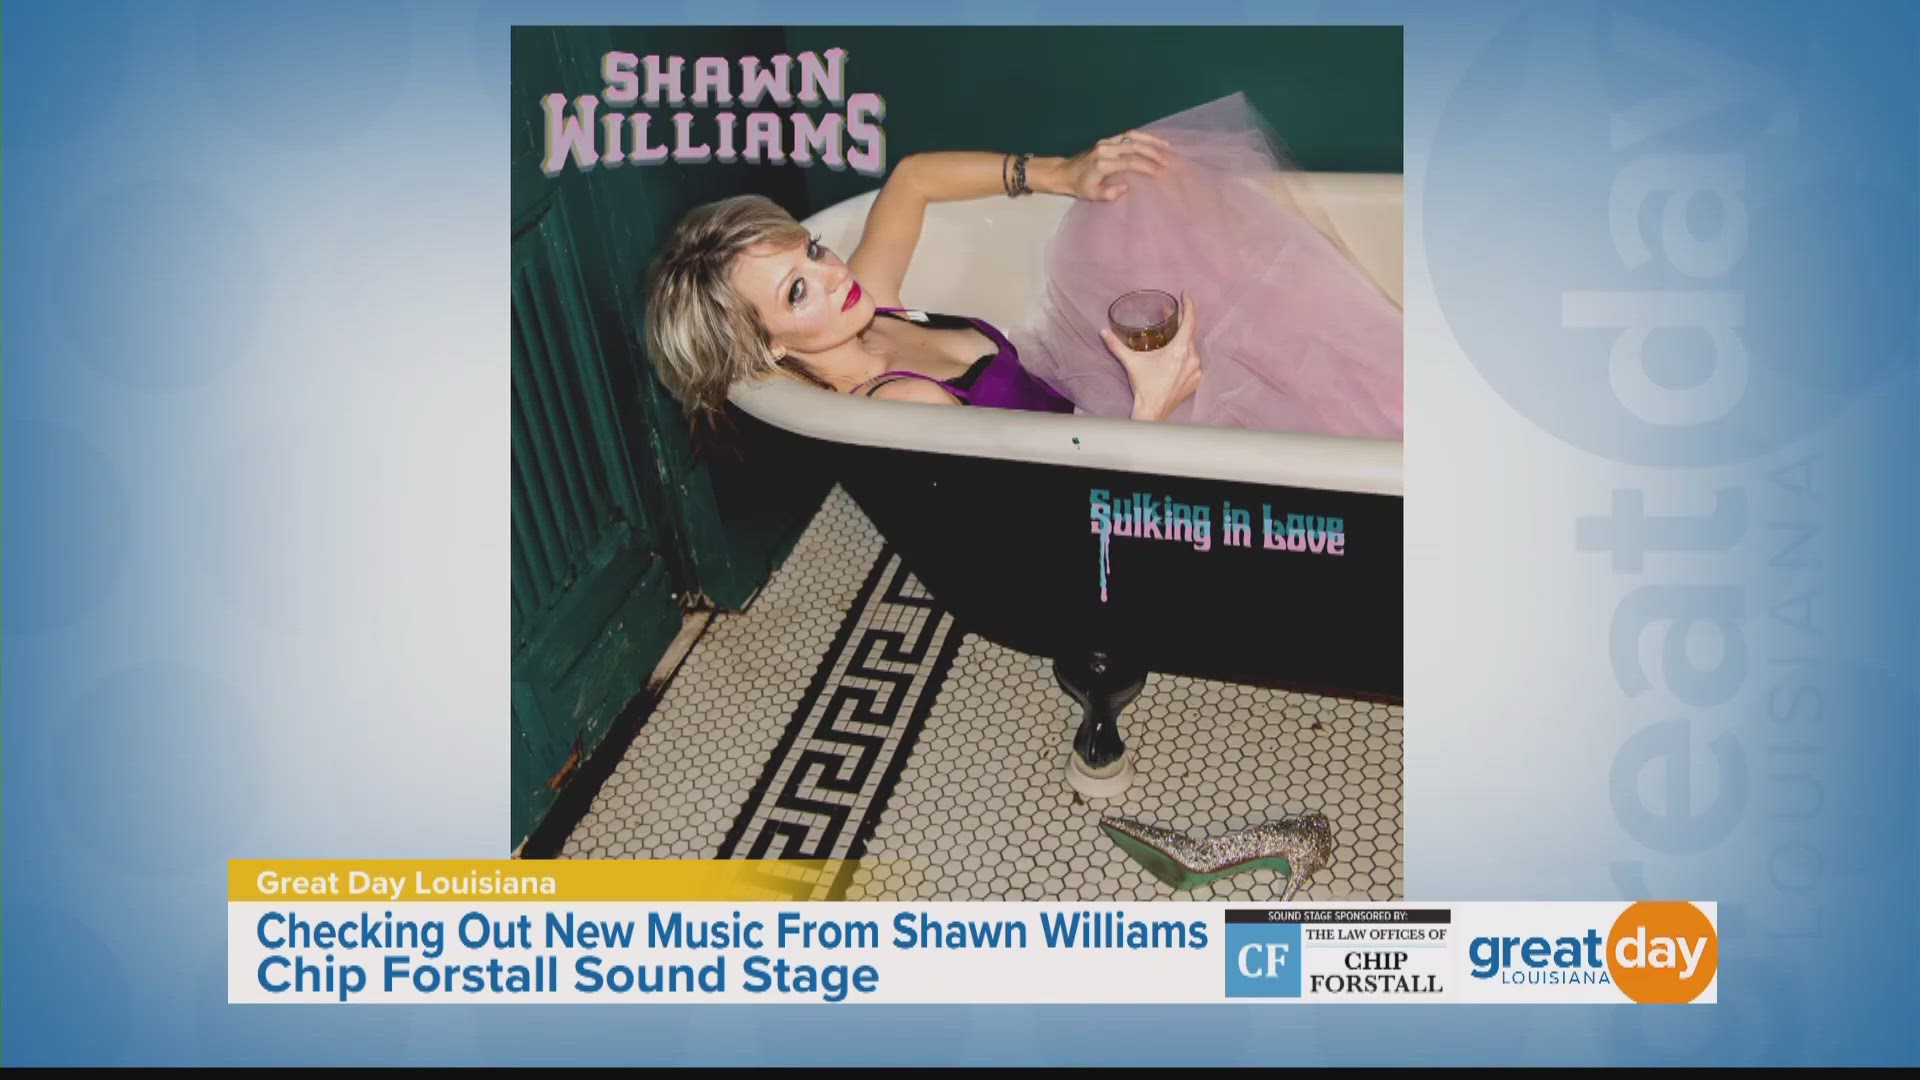 We check out some music from the latest album by local musician Shawn Williams